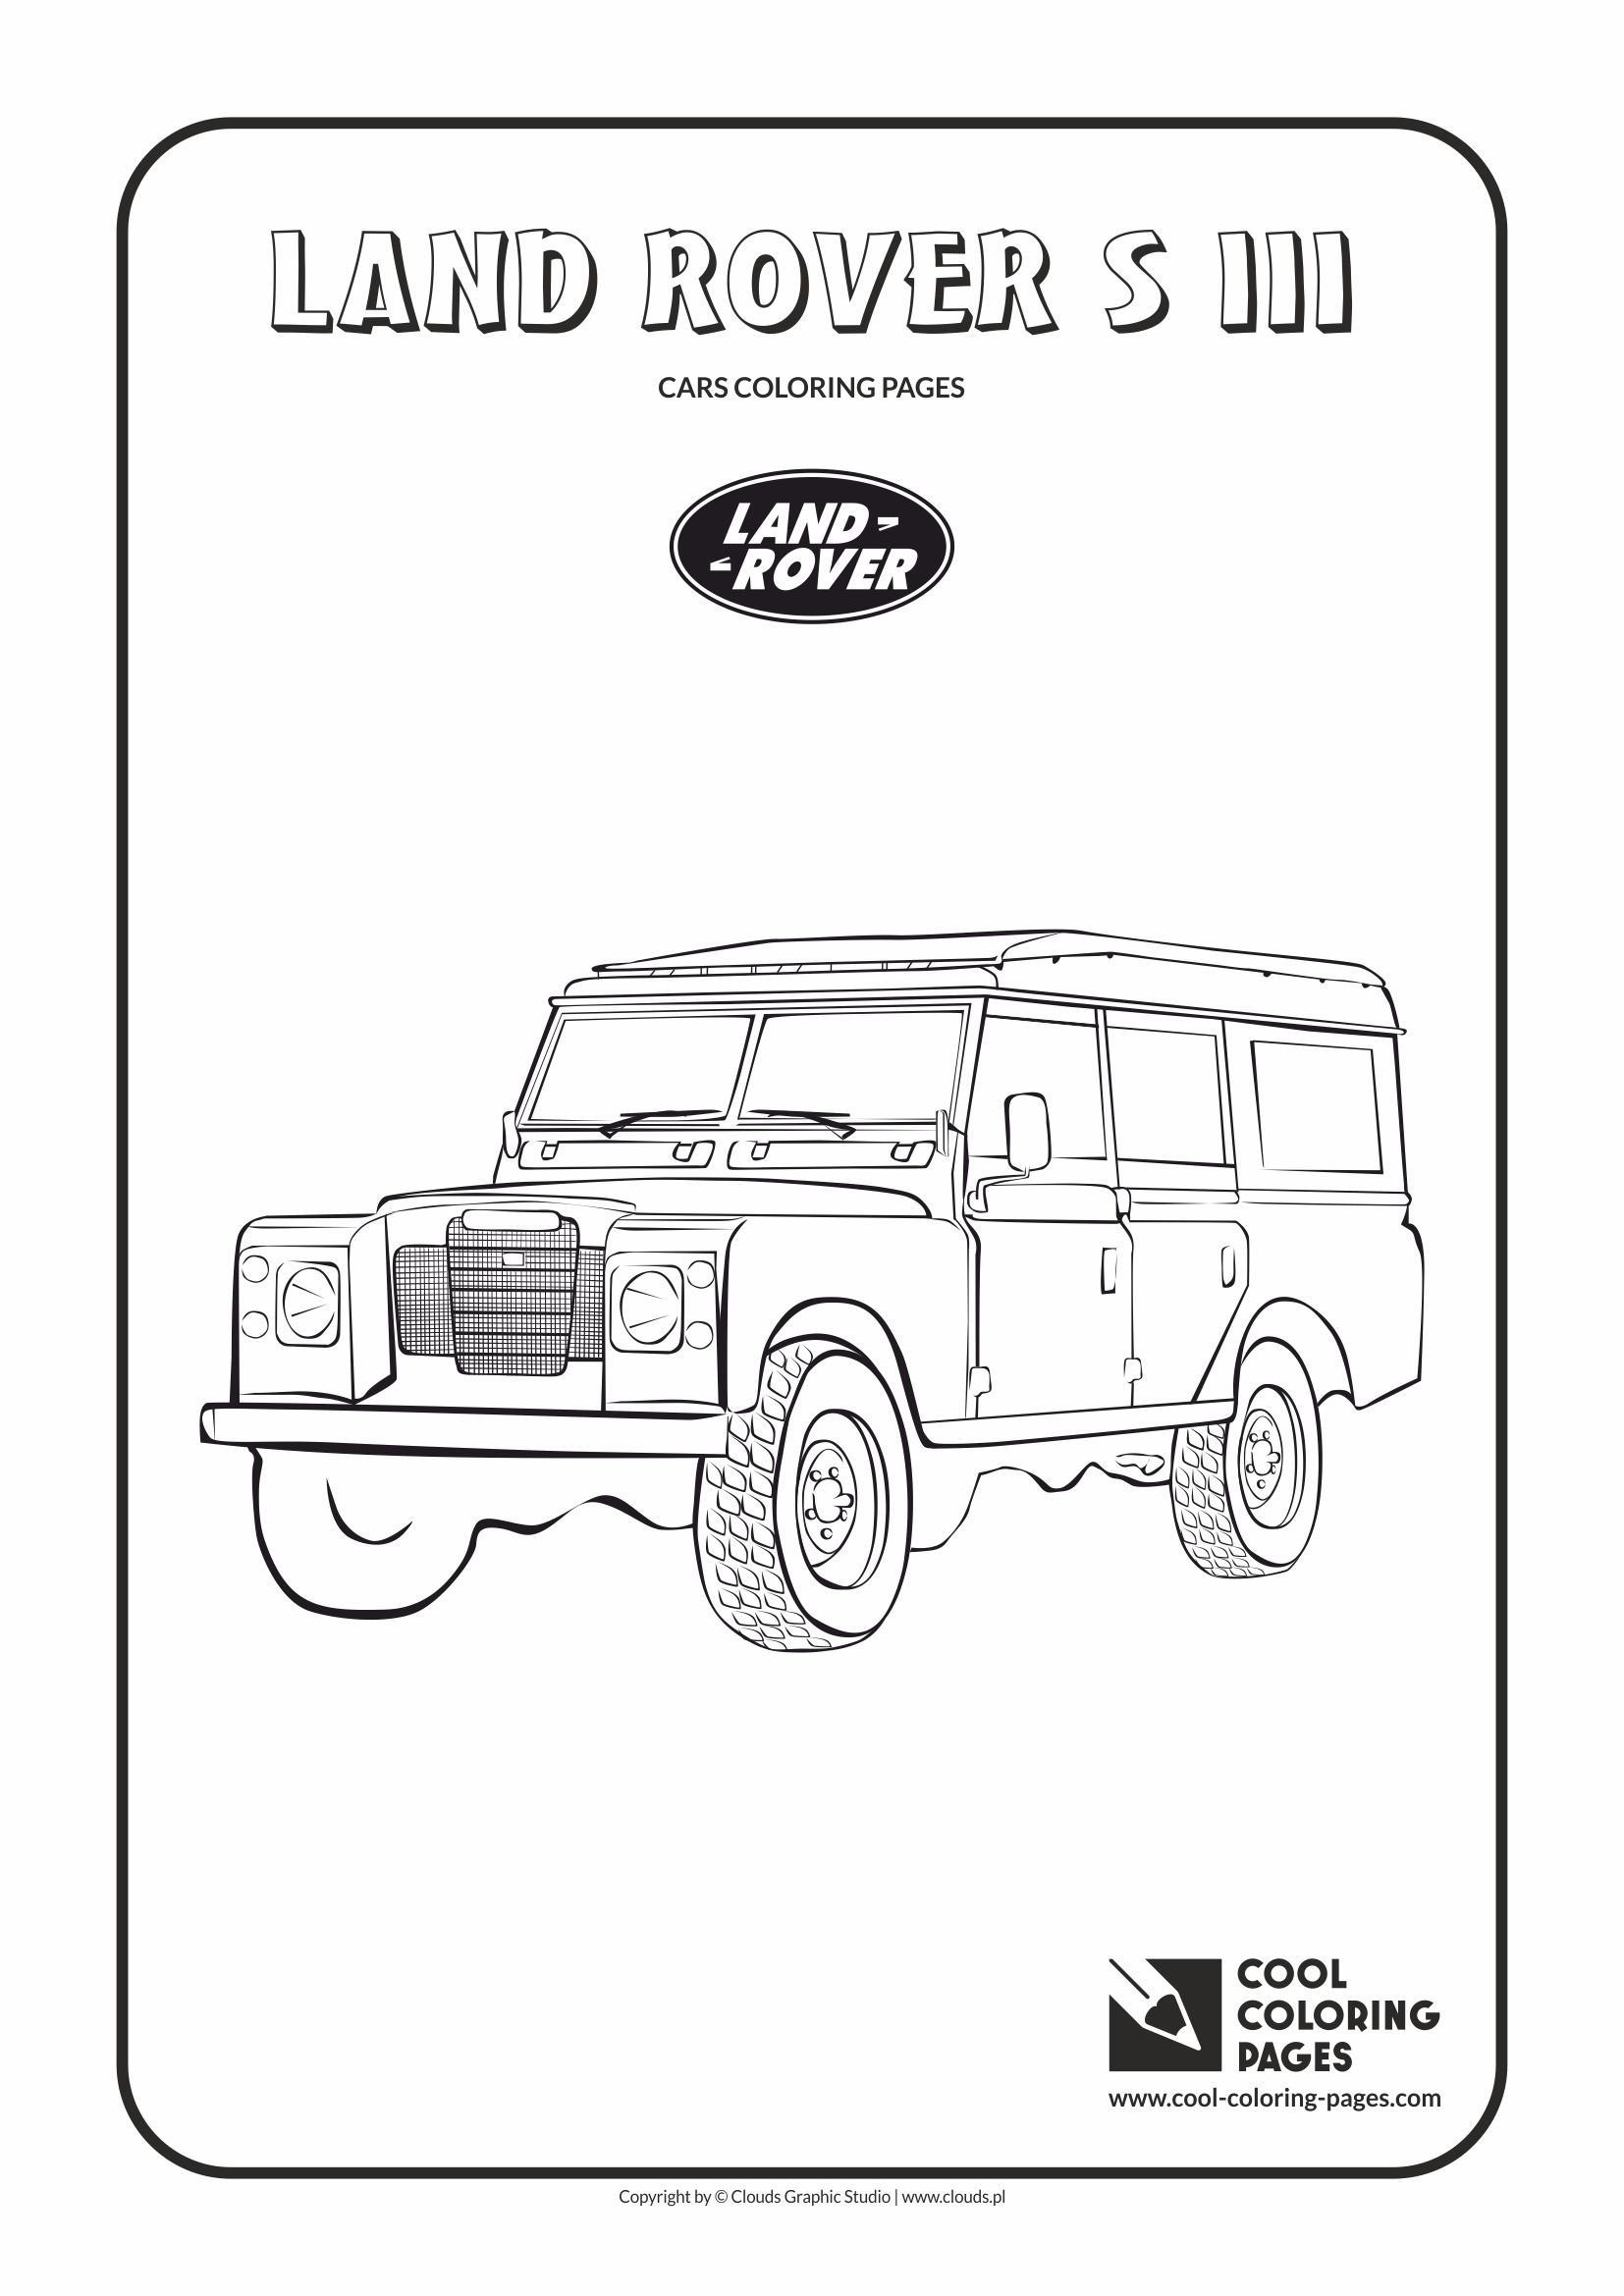 Cars coloring pages | Cool Coloring Pages